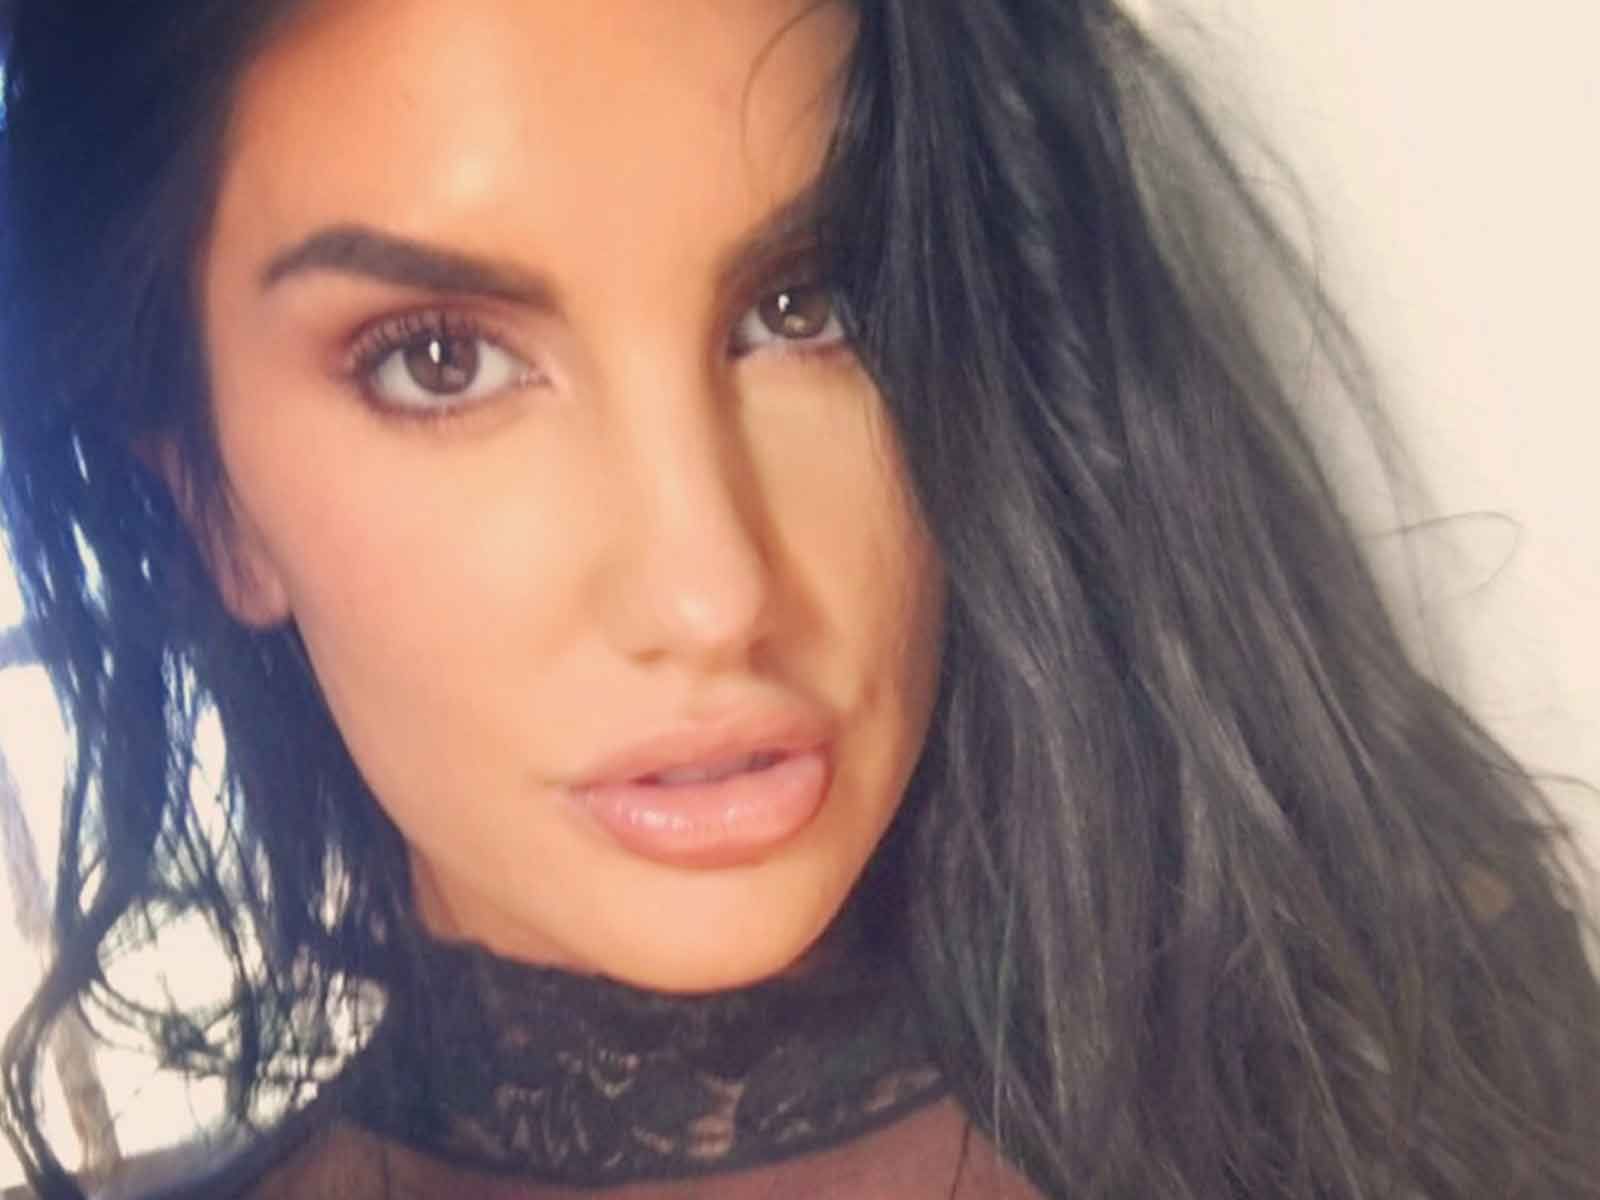 Porn In The Mail - Male Porn Star Accused of Cyberbullying August Ames Speaks Out